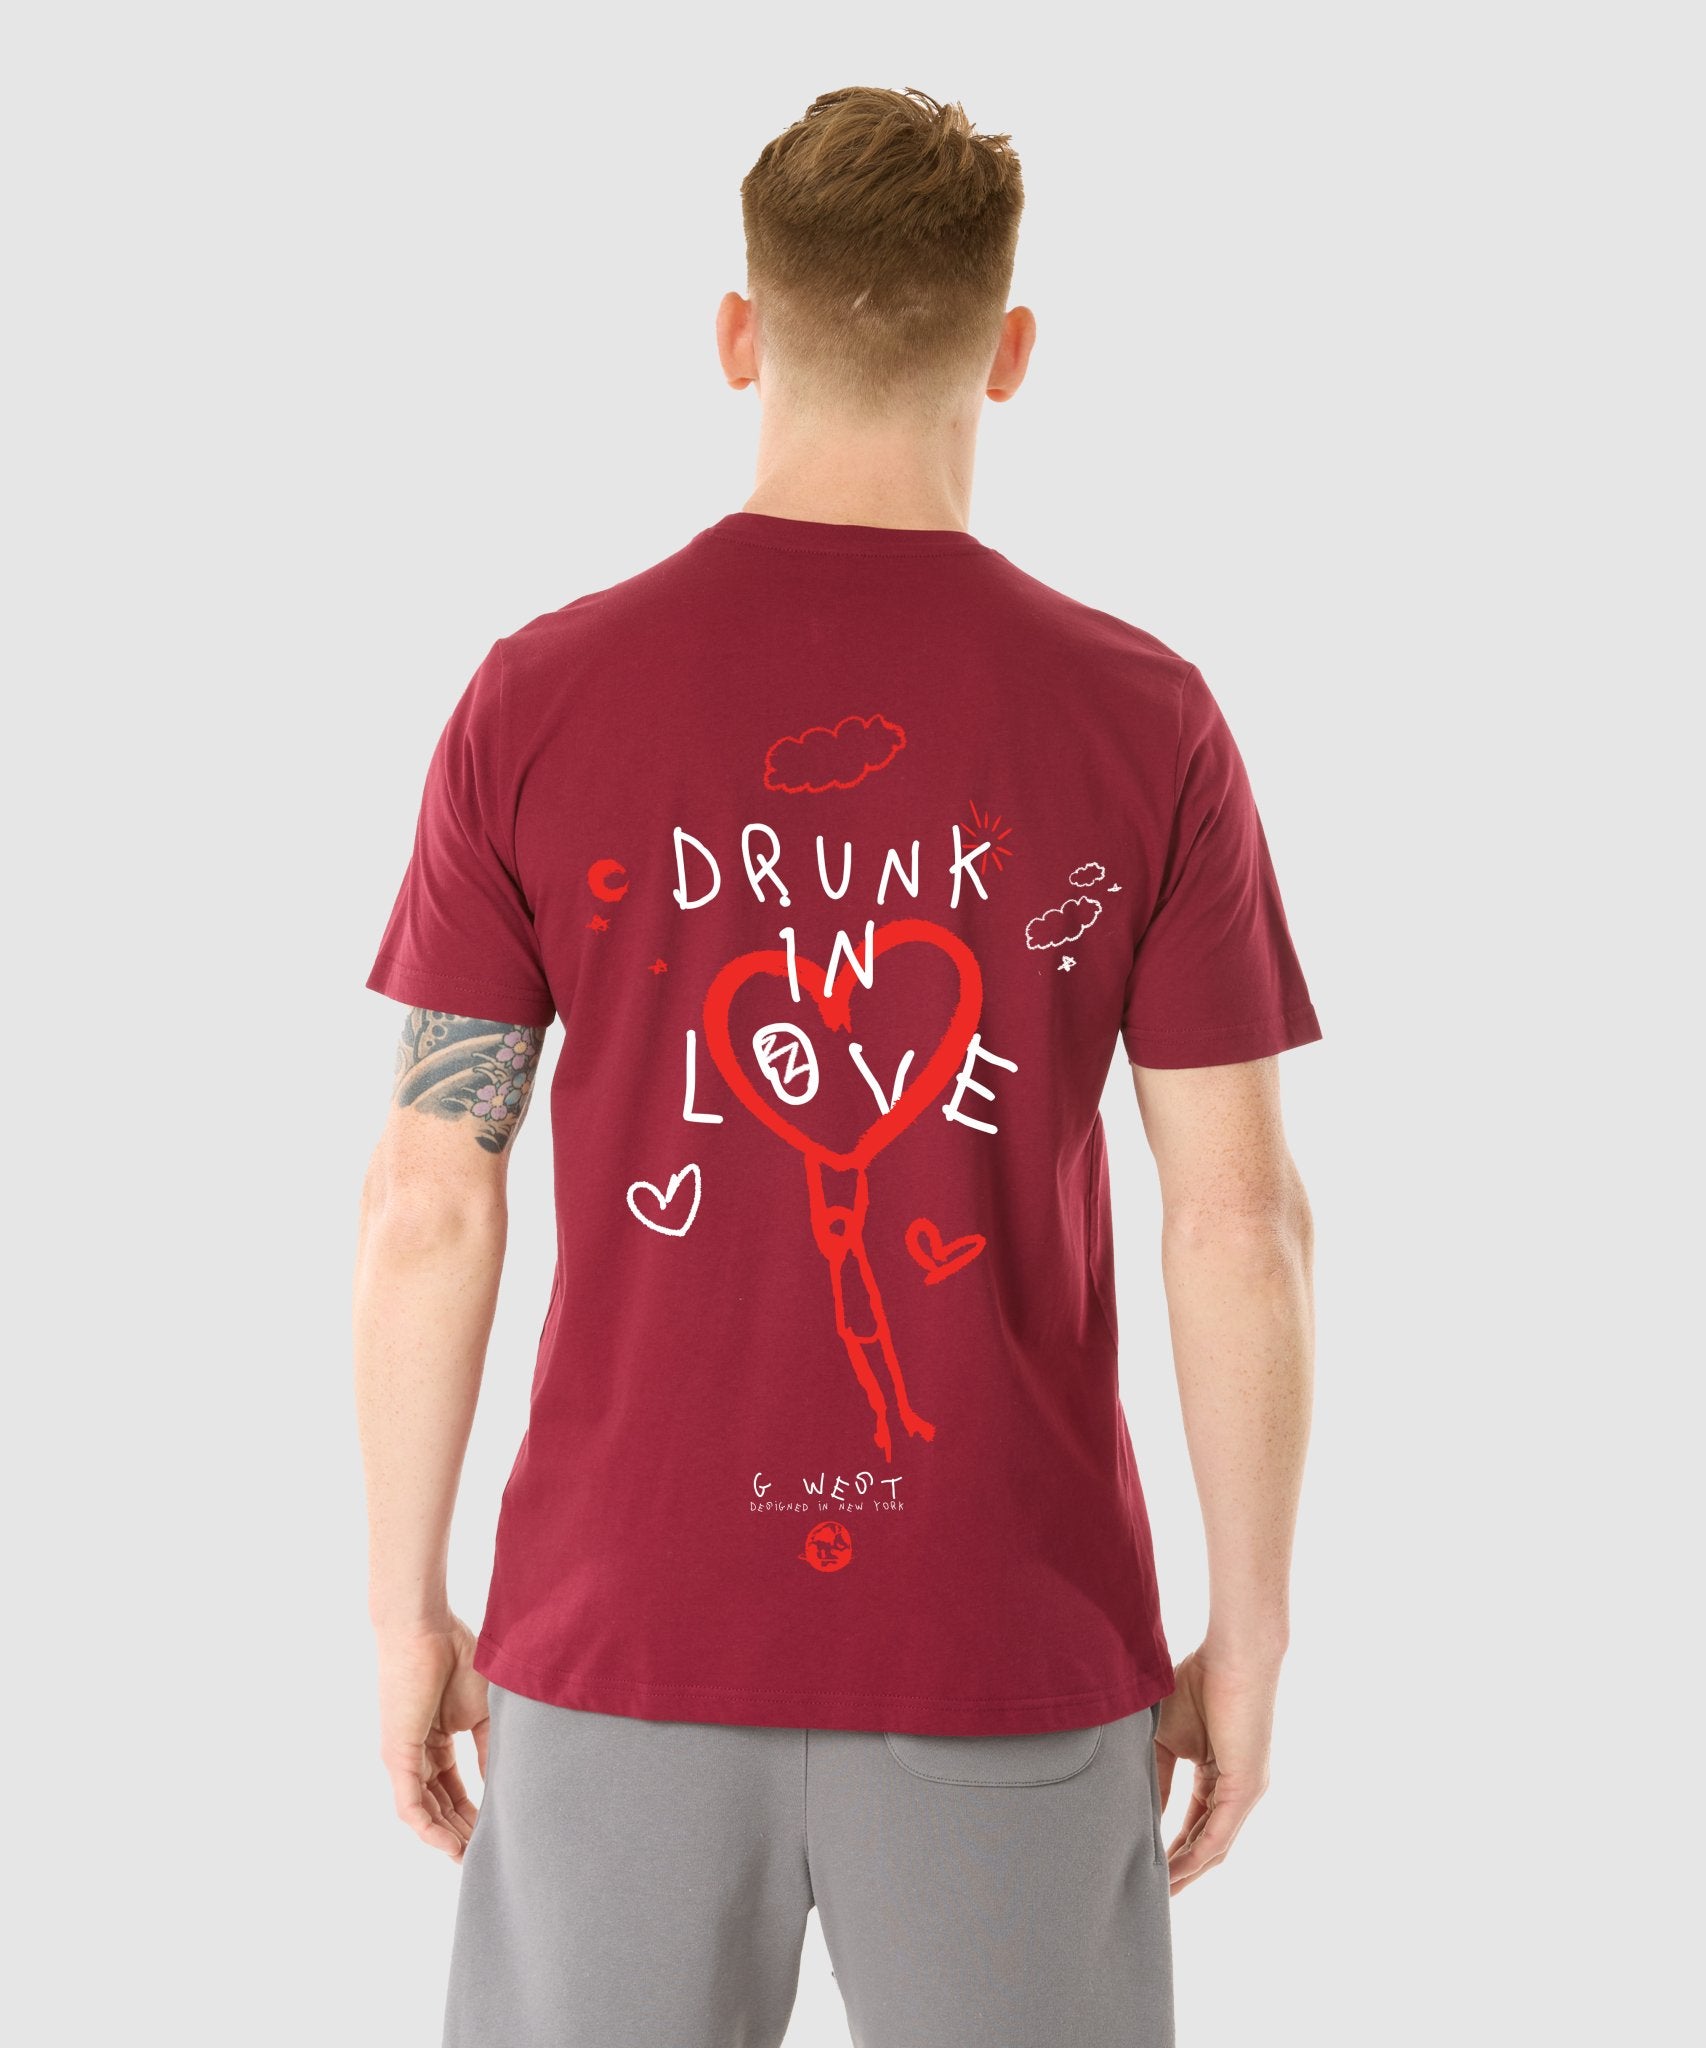 G WEST DRUNK IN LOVE T-SHIRT - 12 COLORS